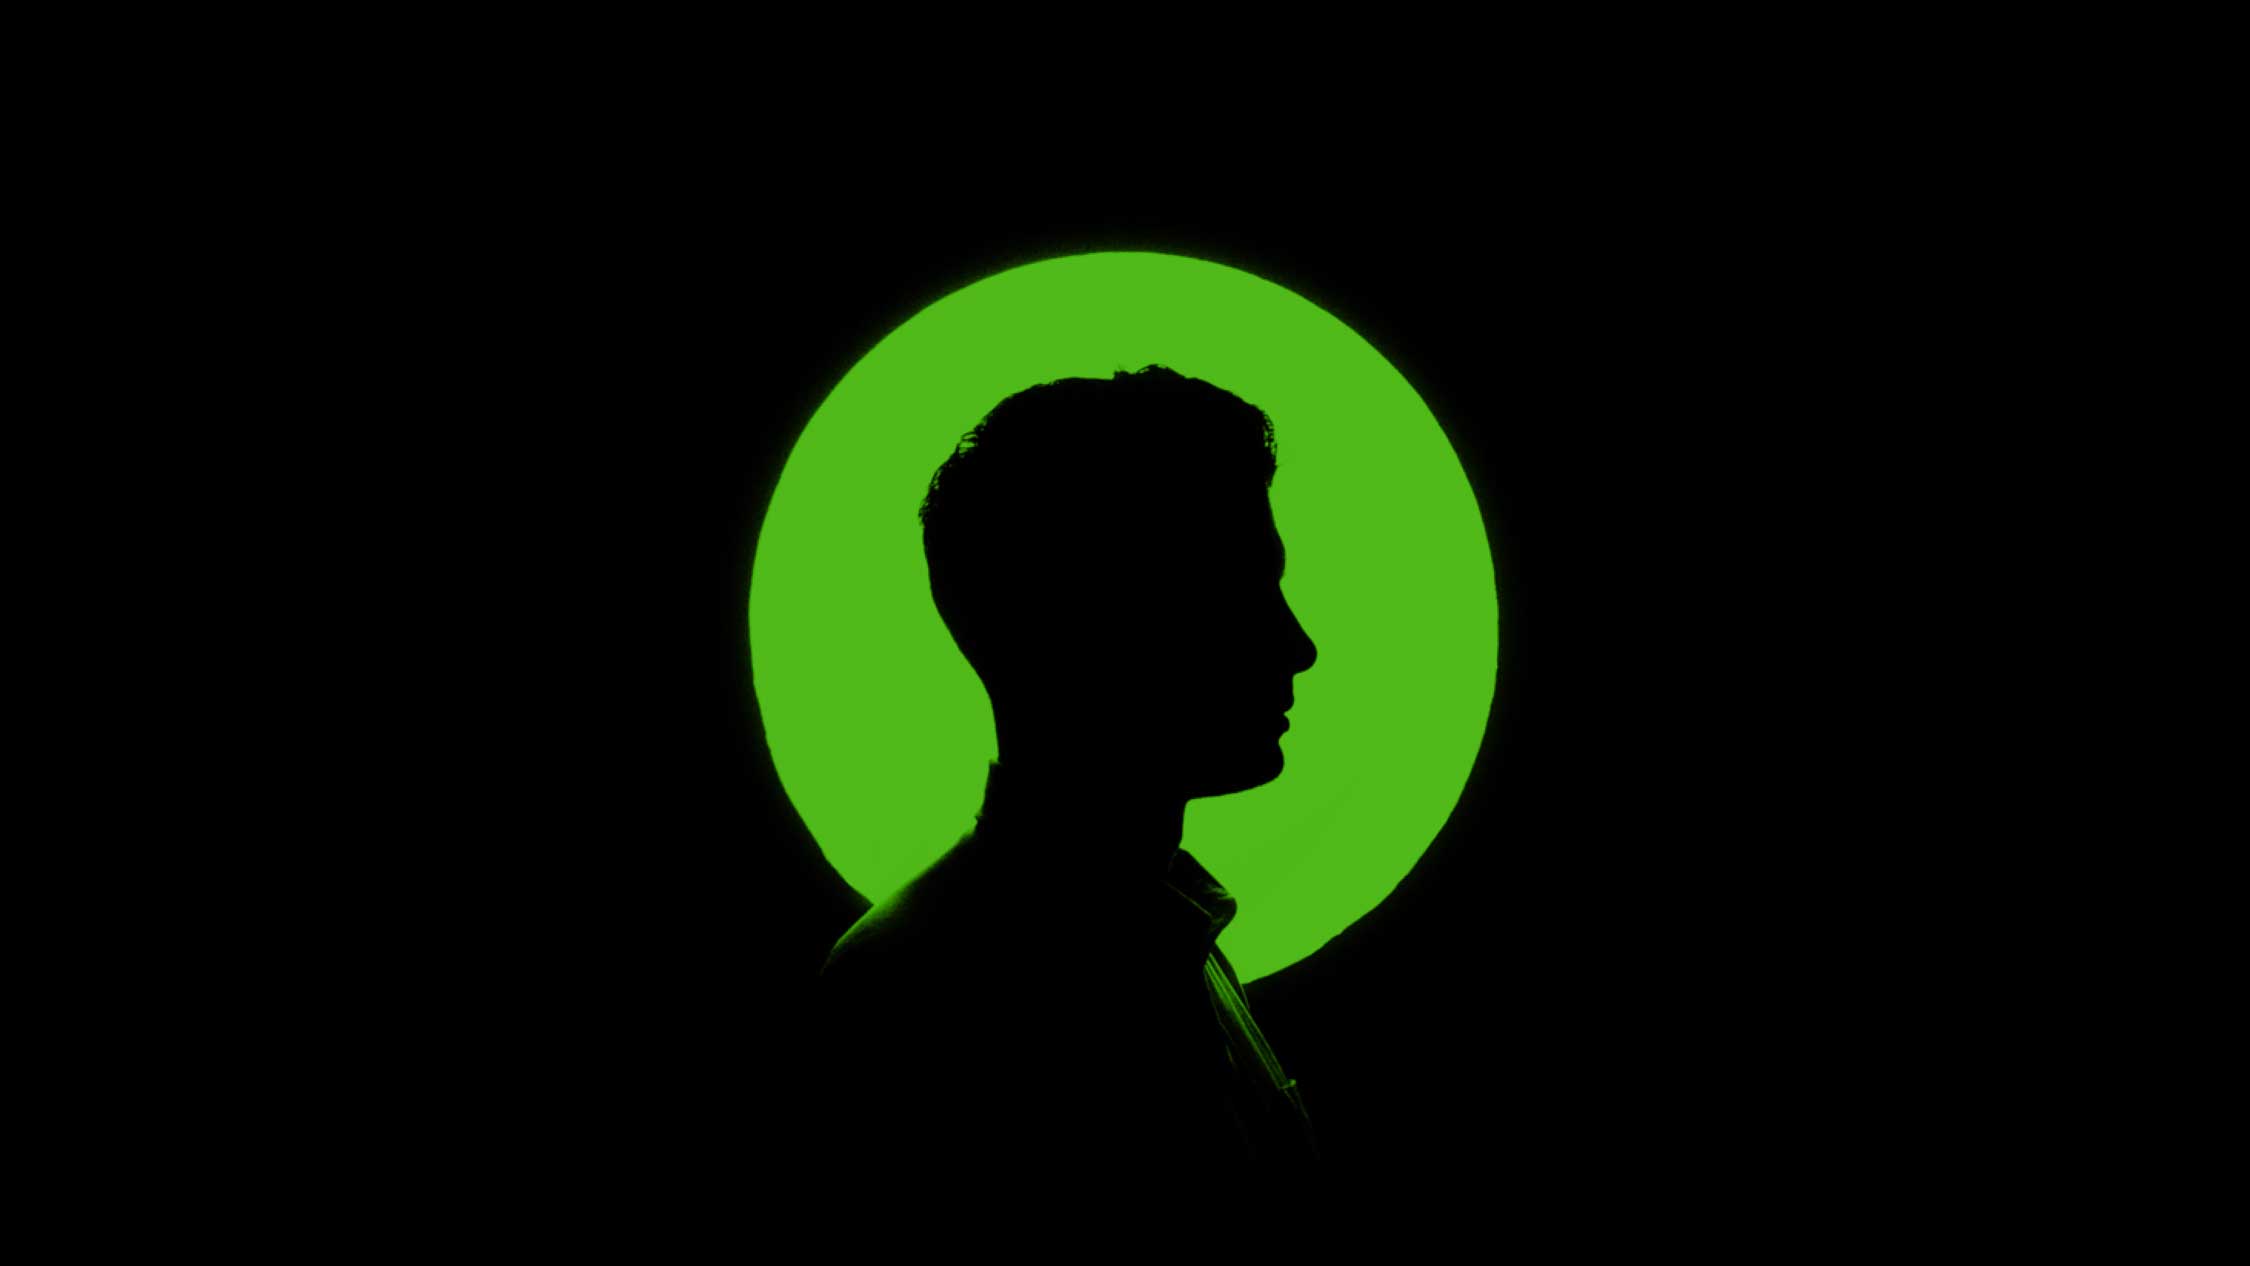 Profile with a green circle